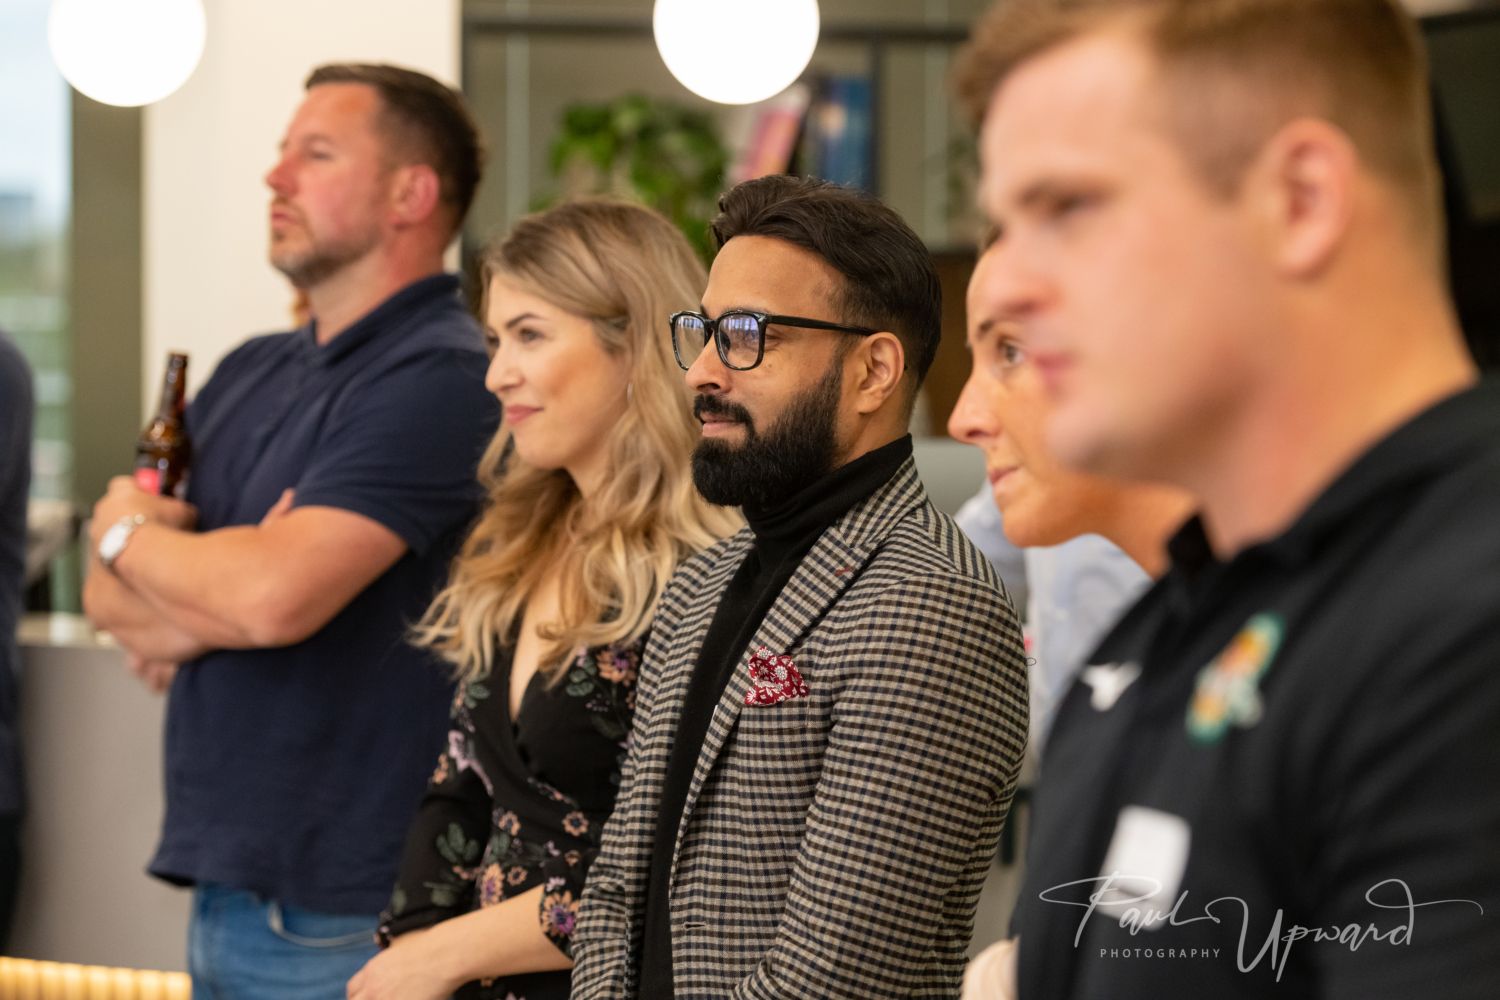 Connect, Collaborate, and Grow: Join the February Business Networking Event and Take Your Business to the Next Level